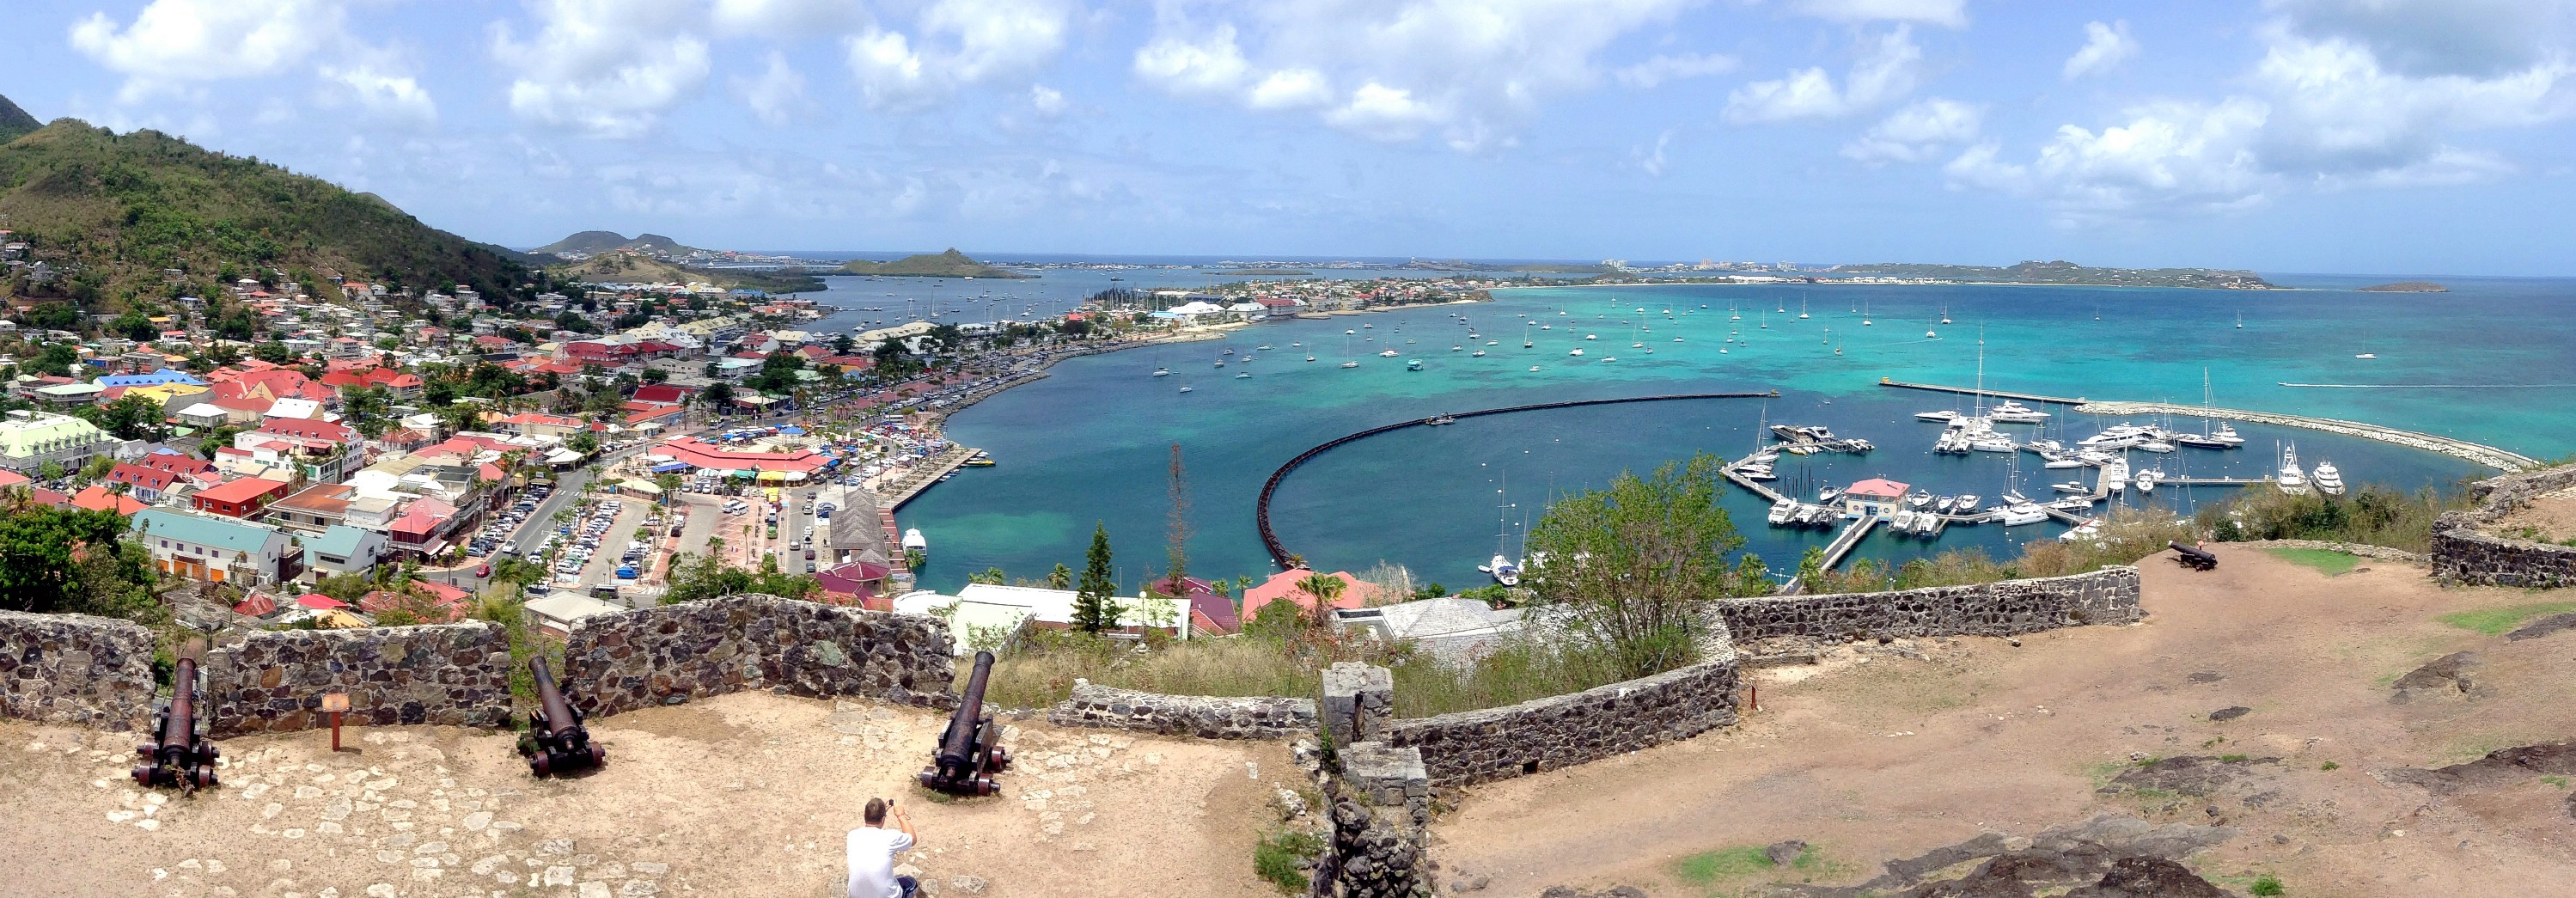 A panorama of the view from Fort Louis overlooking the town of Marigot, Saint Martin, Lesser Antilles. June 8, 2015.